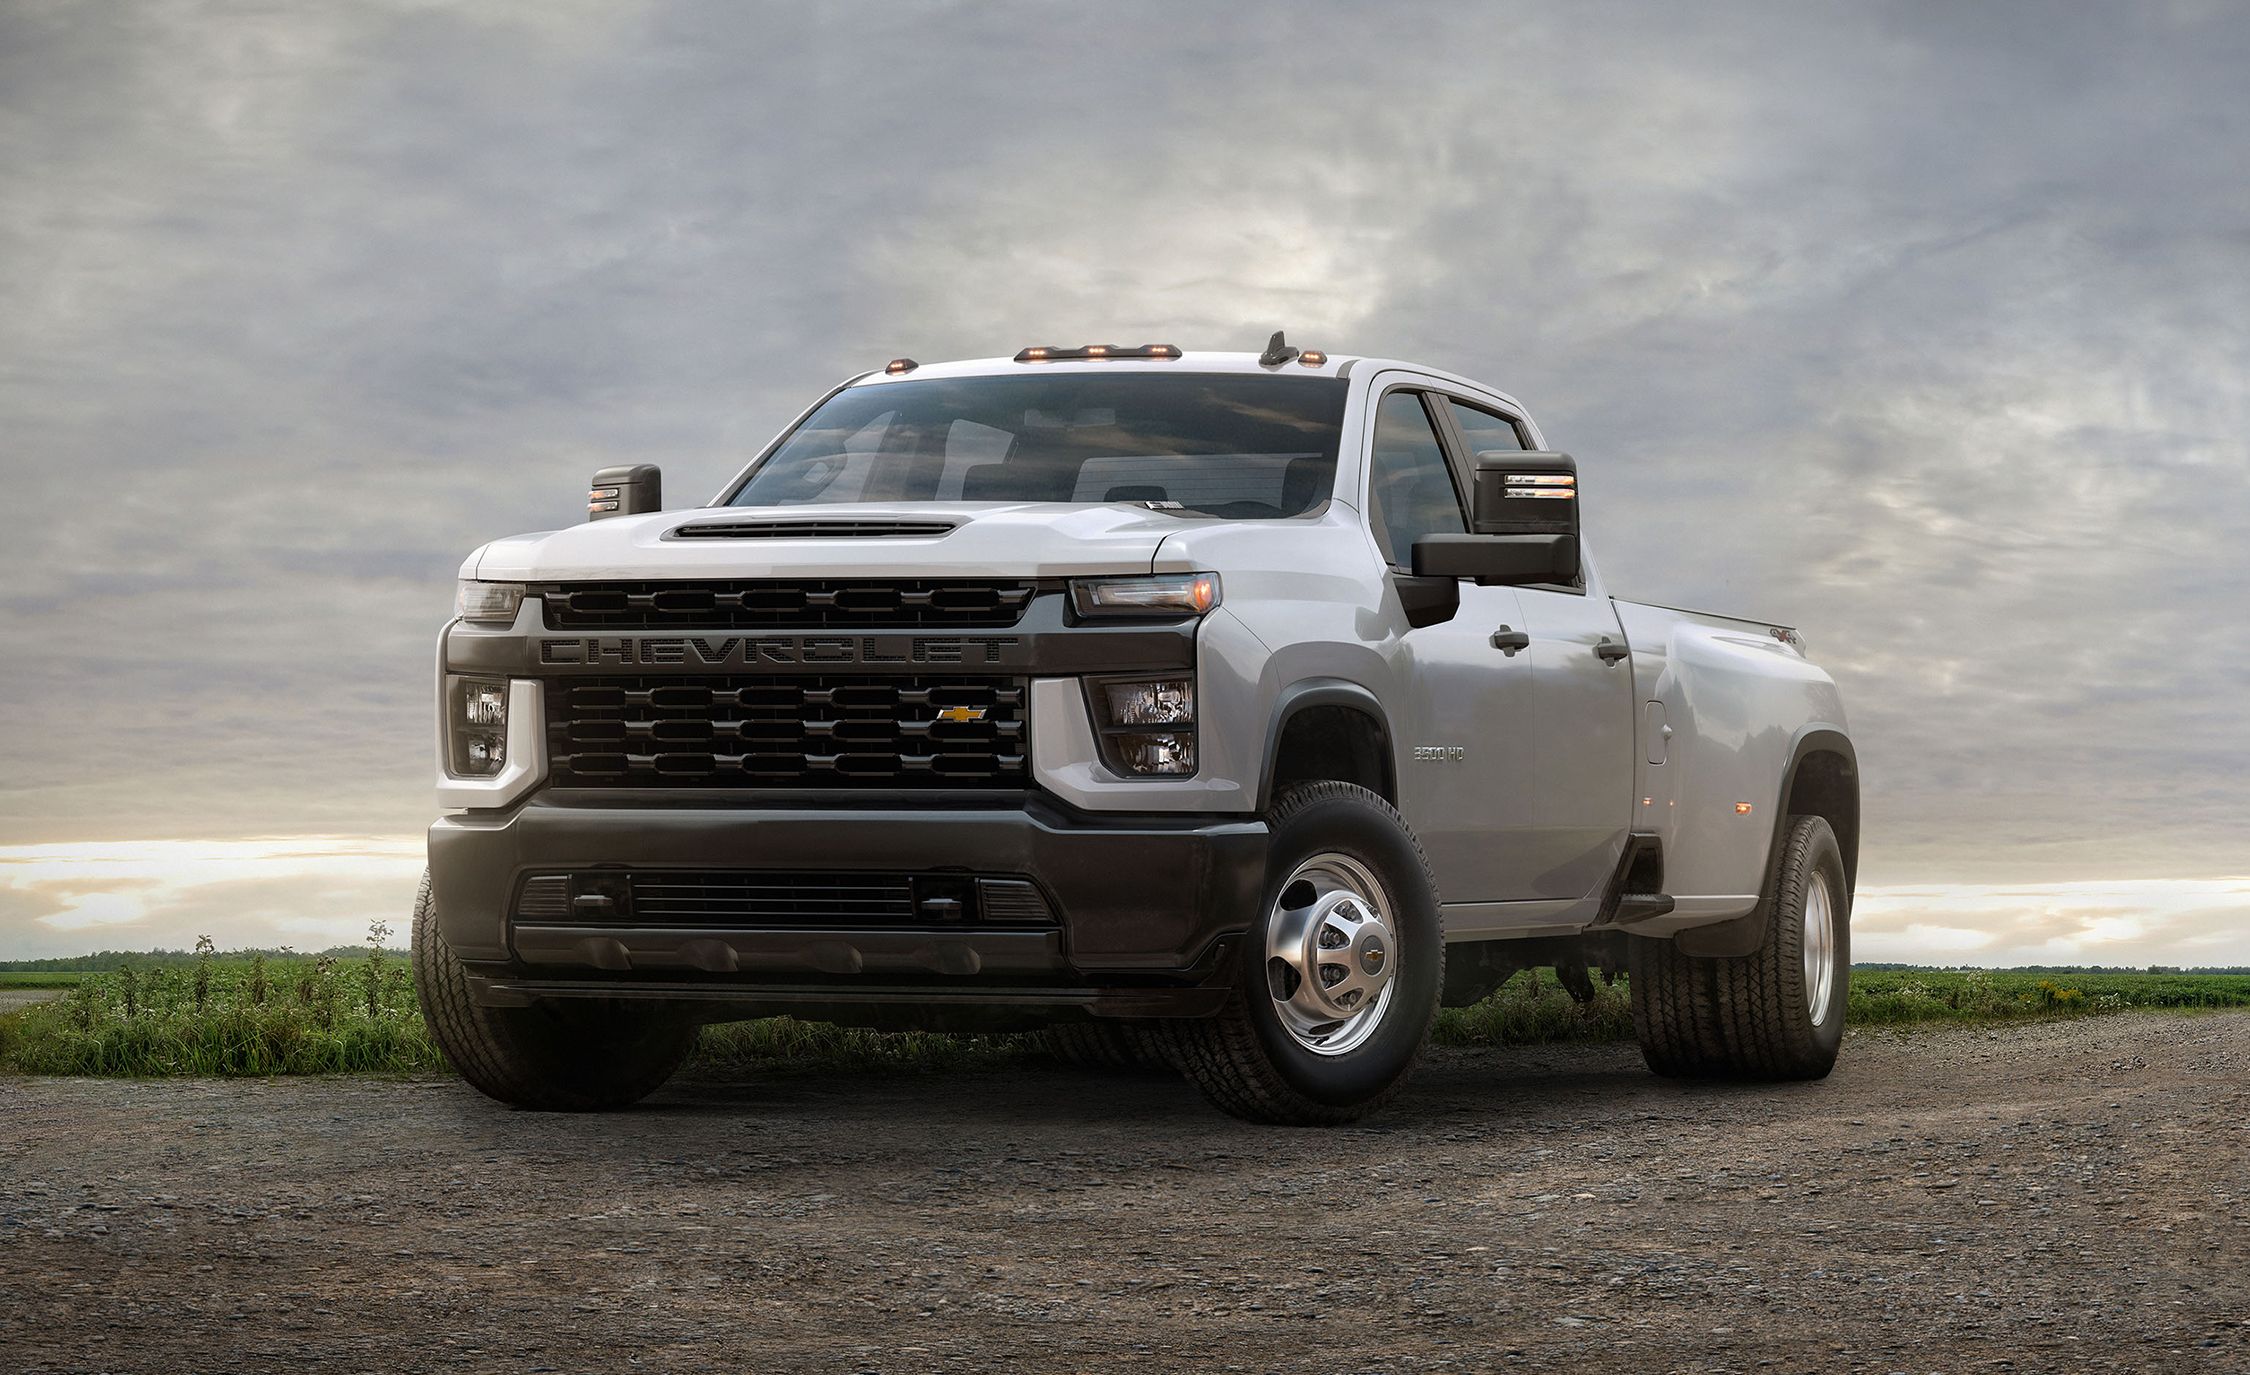 The Best Tow Trucks on the Market